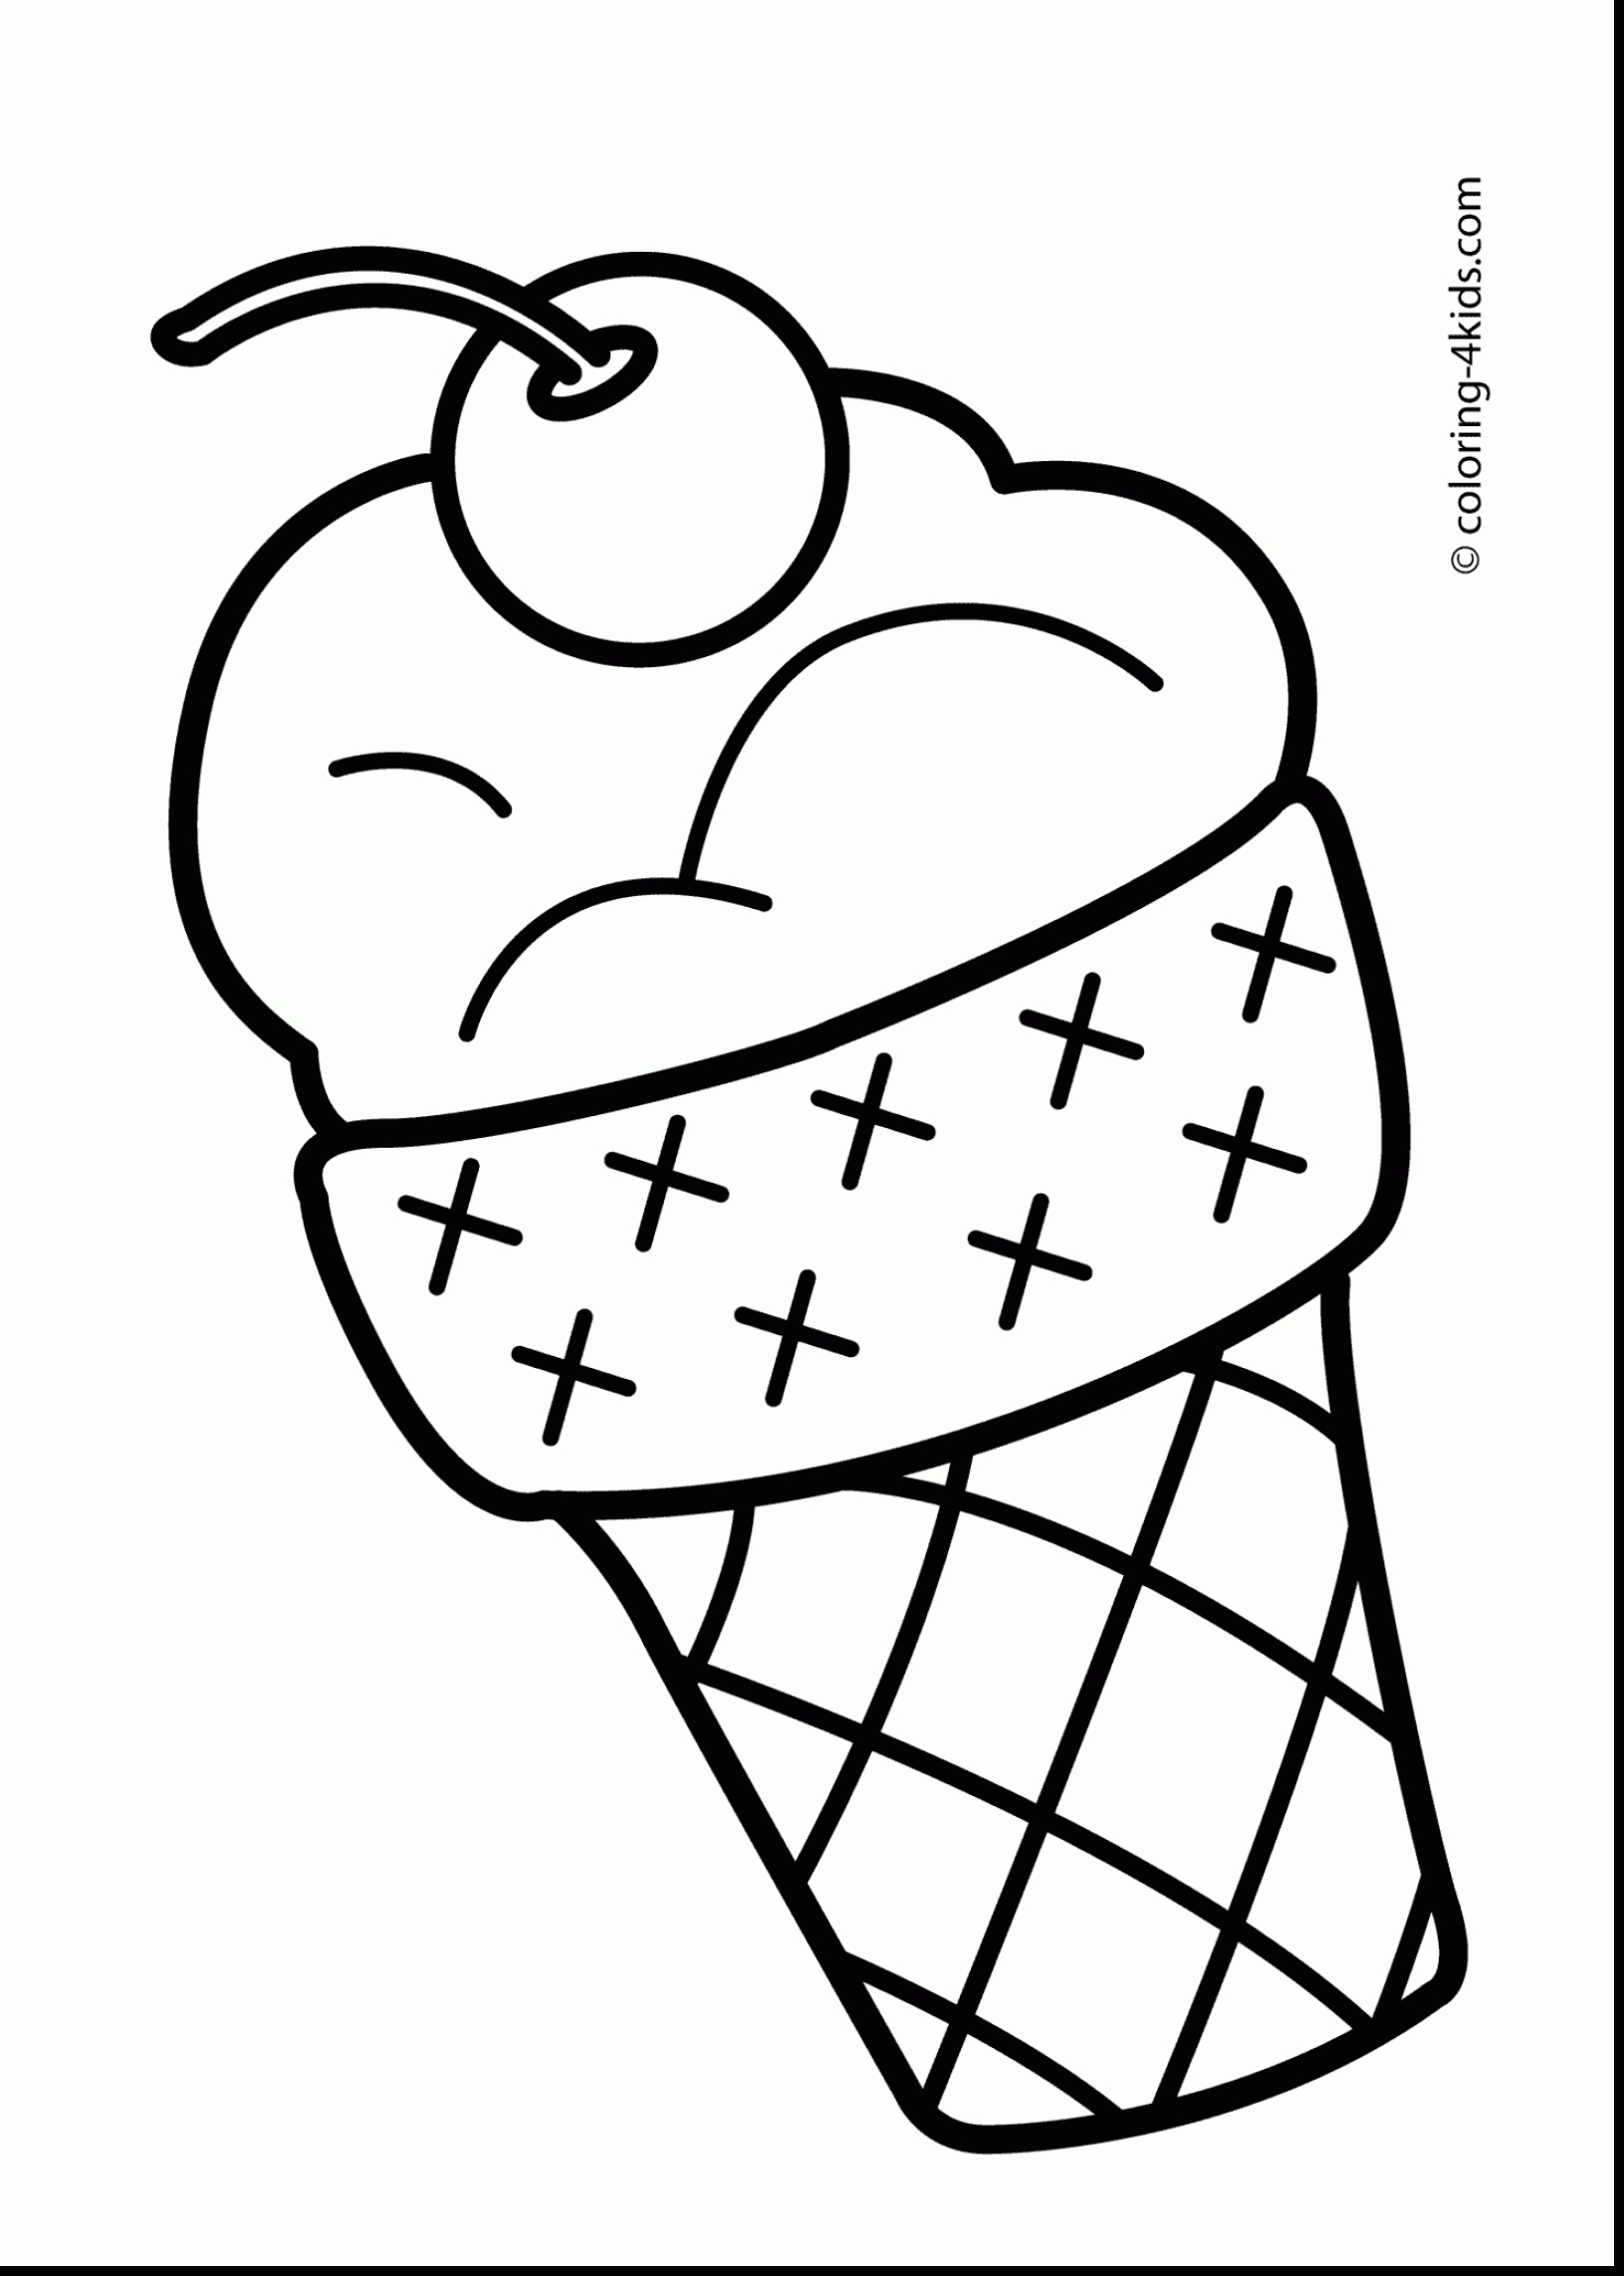 Coloring Pages : Free Printable Coloring Pages For Toddlers Color - Free Printable Coloring Pages For Toddlers